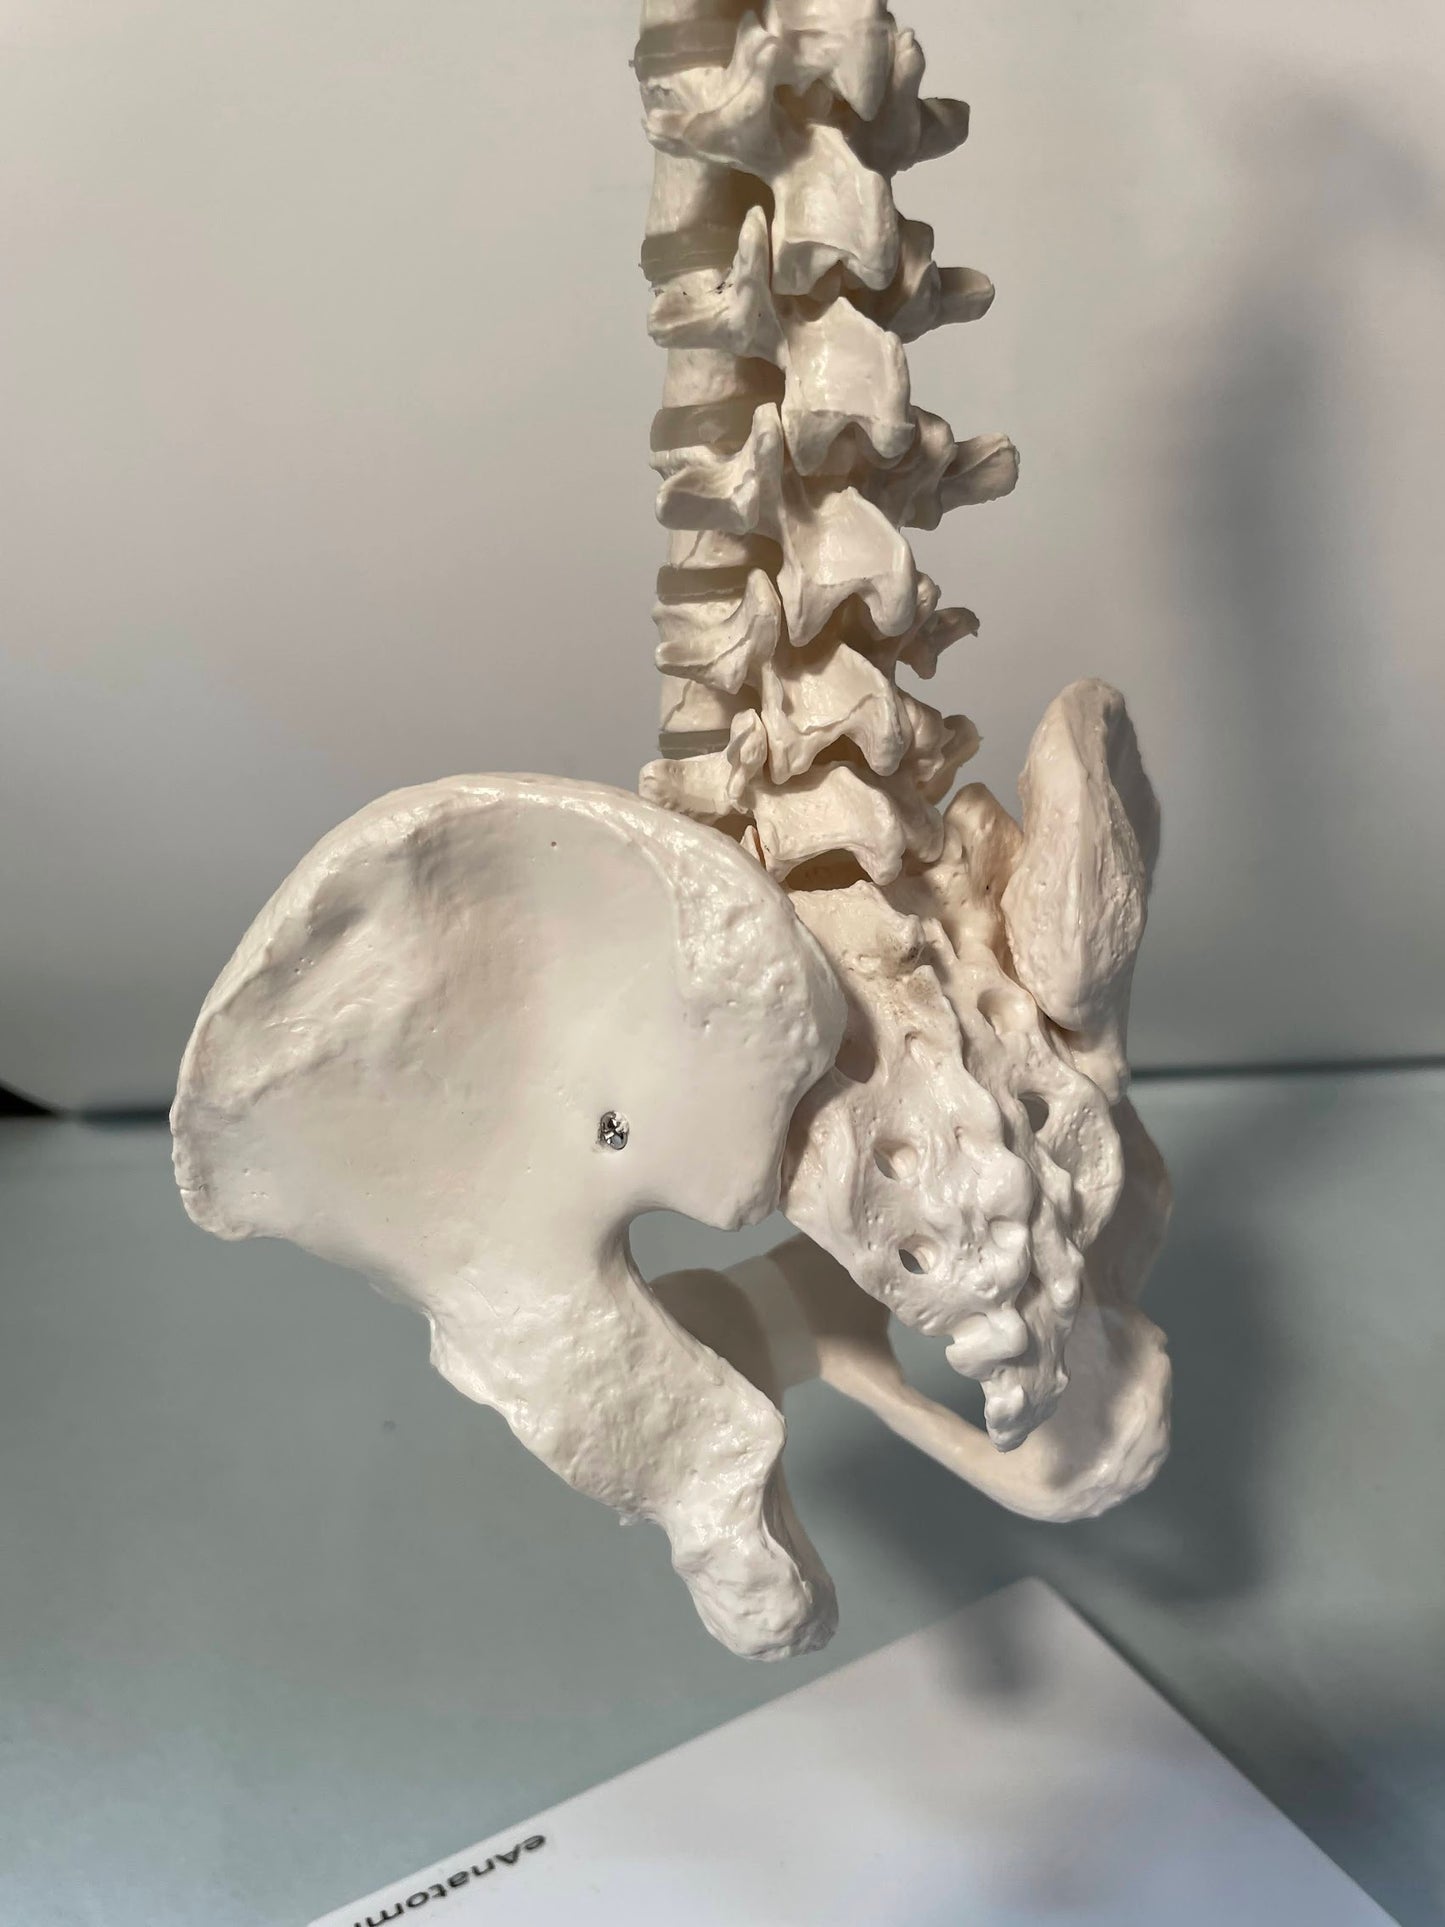 Reduced model of the spine presented on a stand